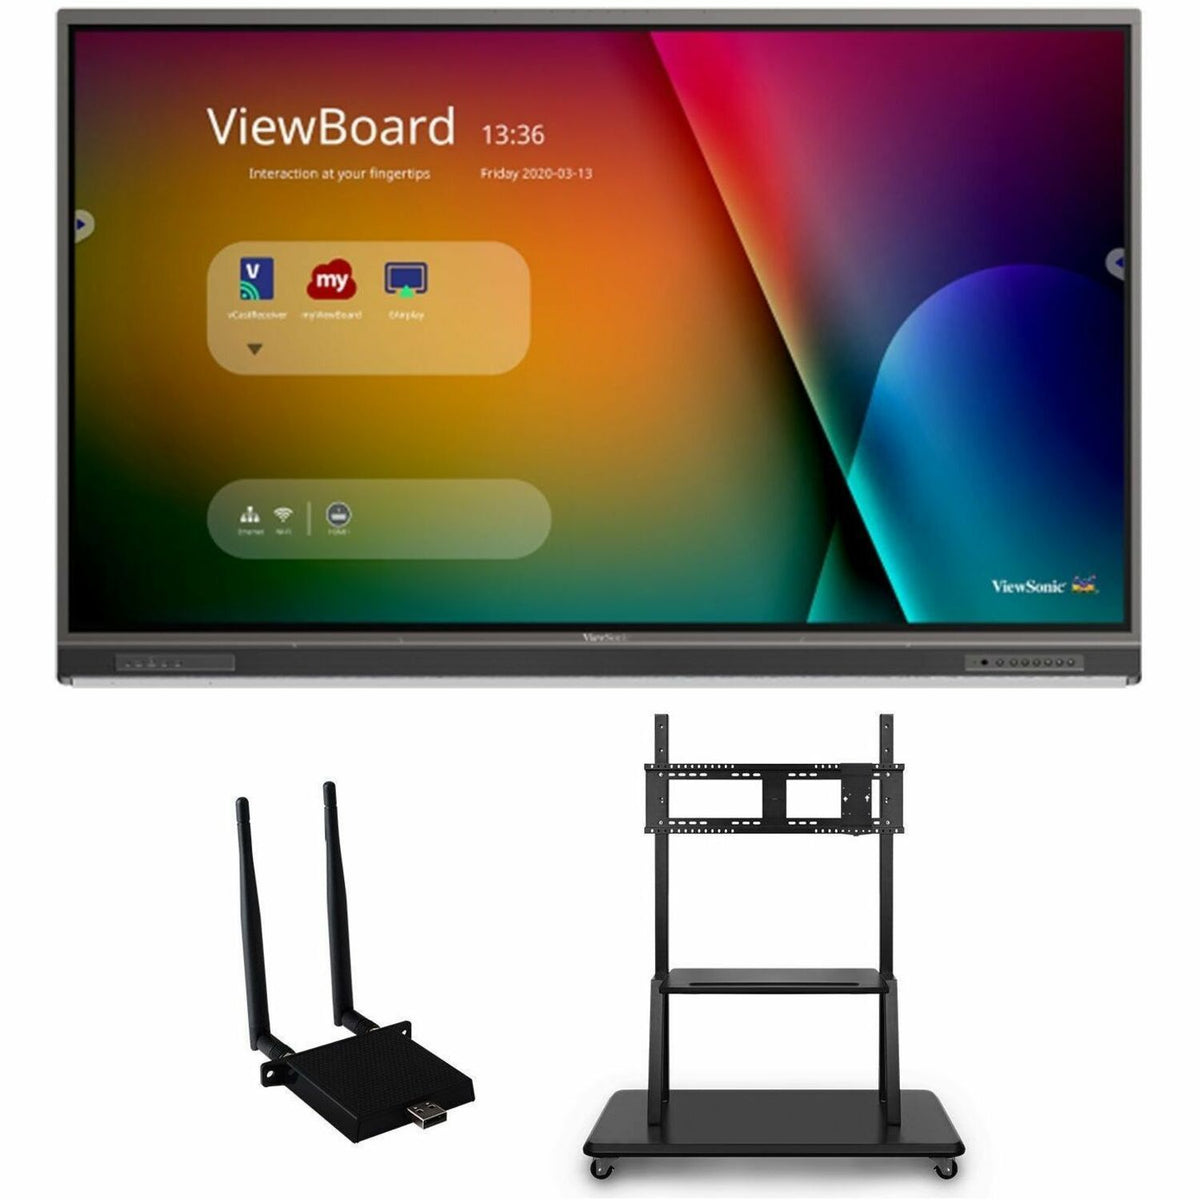 ViewSonic ViewBoard IFP7552-1C-E2 - 4K Interactive Display with WiFi Adapter, Mobile Trolley Cart - 400 cd/m2 - 75" - IFP7552-1C-E2